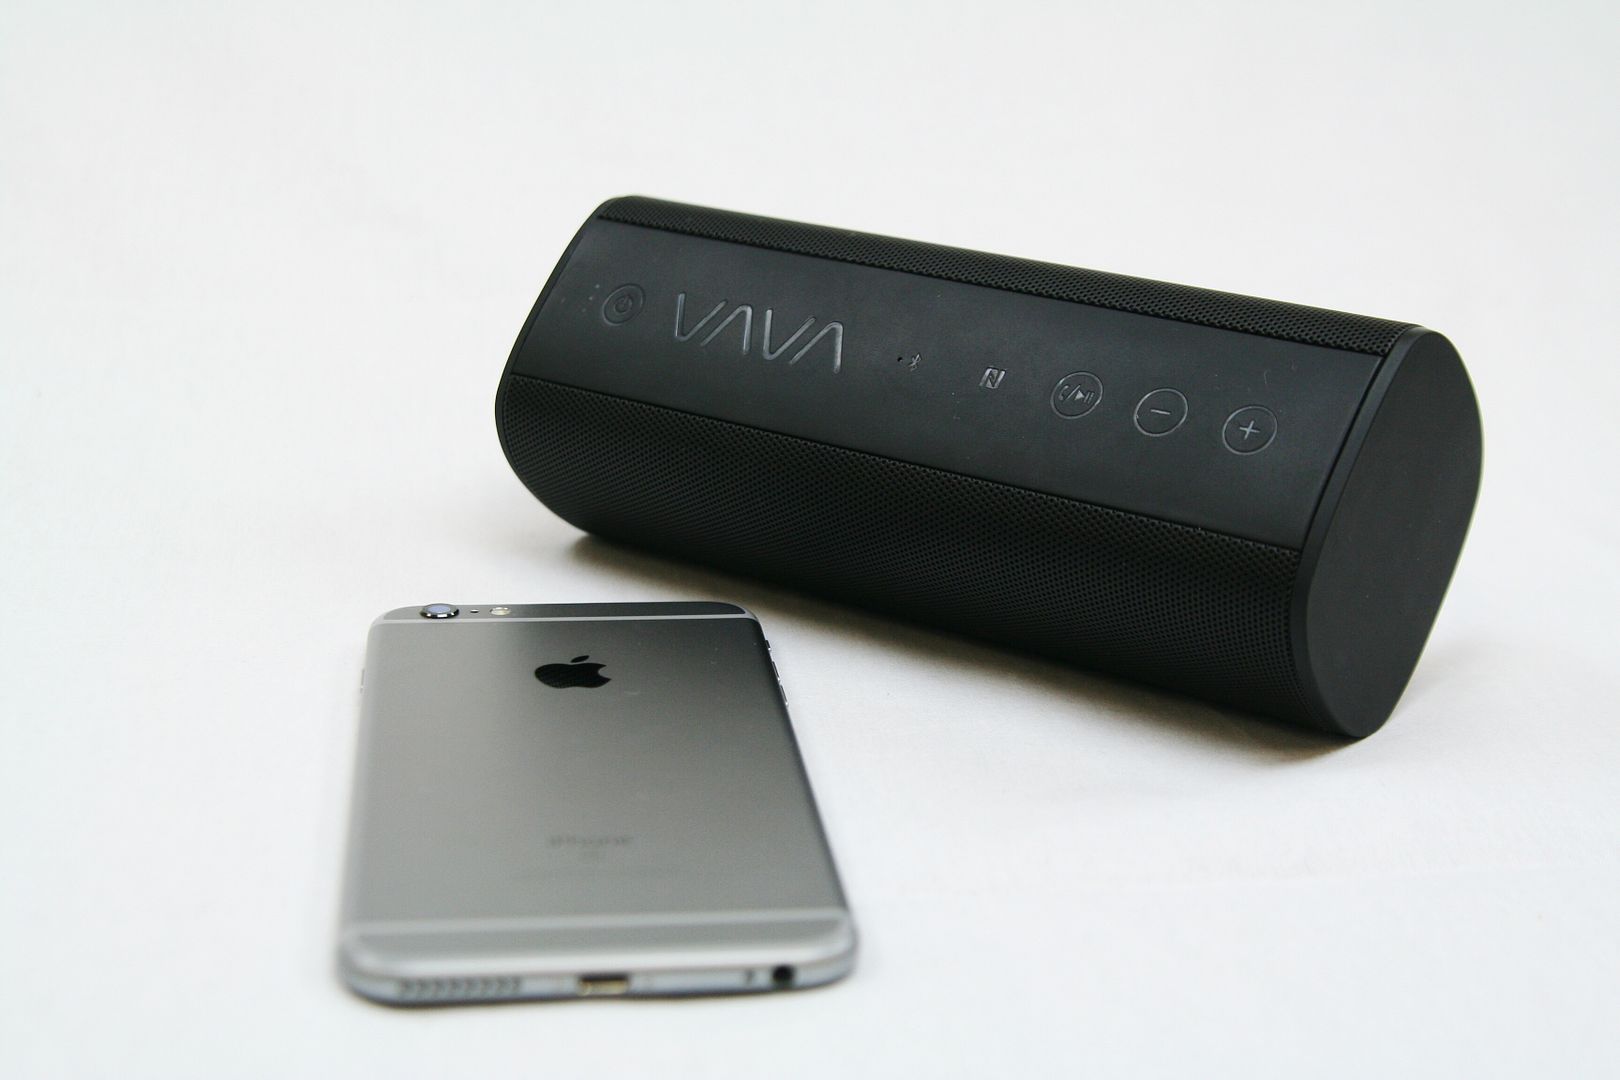 VaVa Voom2: An affordable, amazing new portable Bluetooth speaker that's water-resistant too